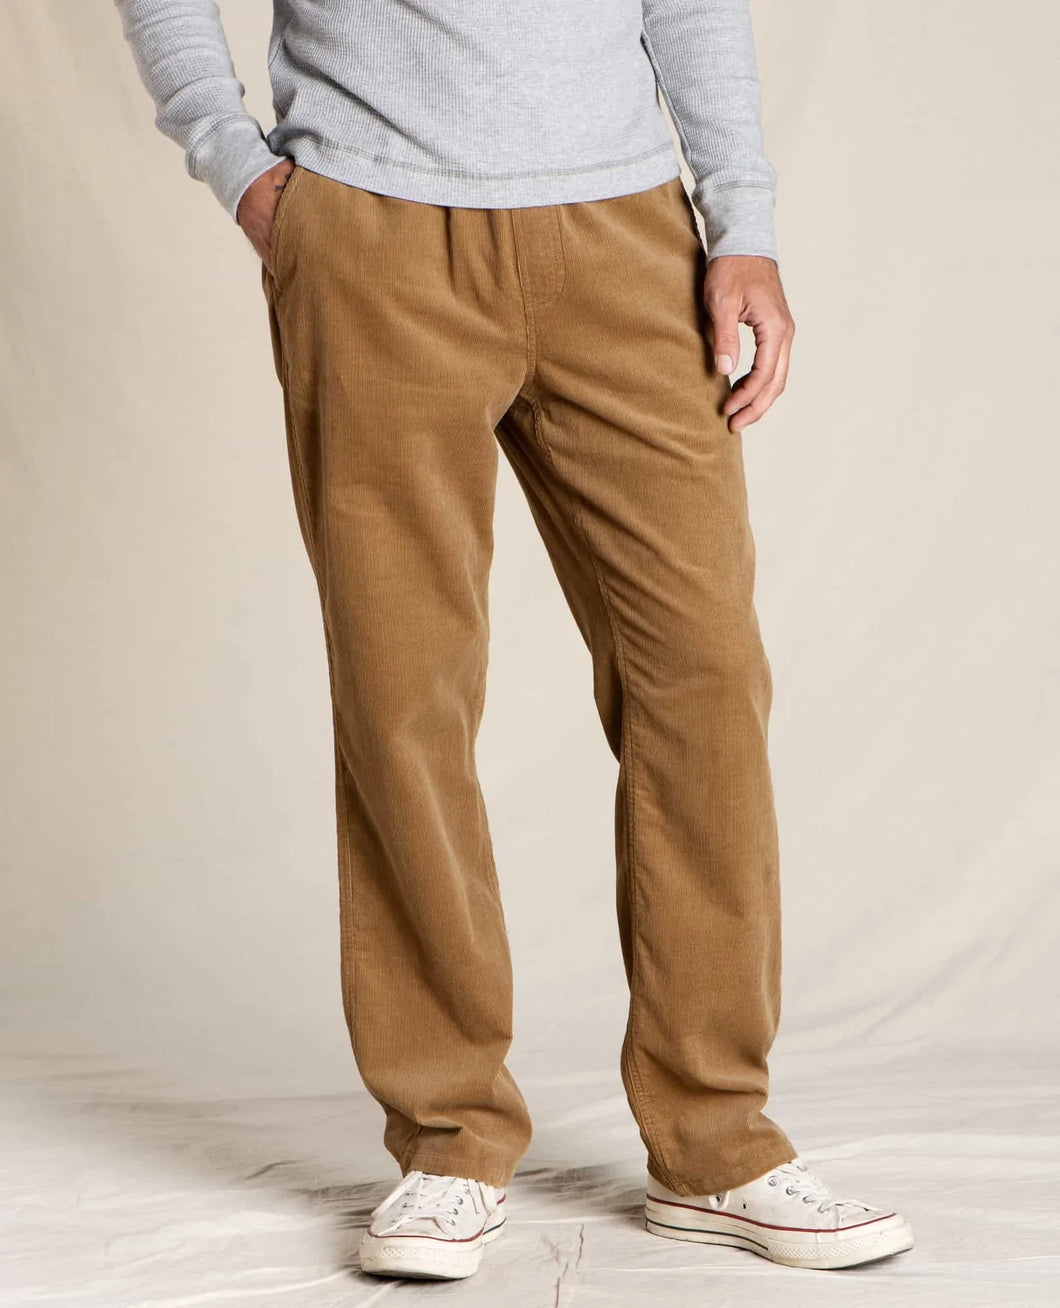 SCOUTER CORD PULL-ON PANT I HONEY BROWN I TOAD & CO.